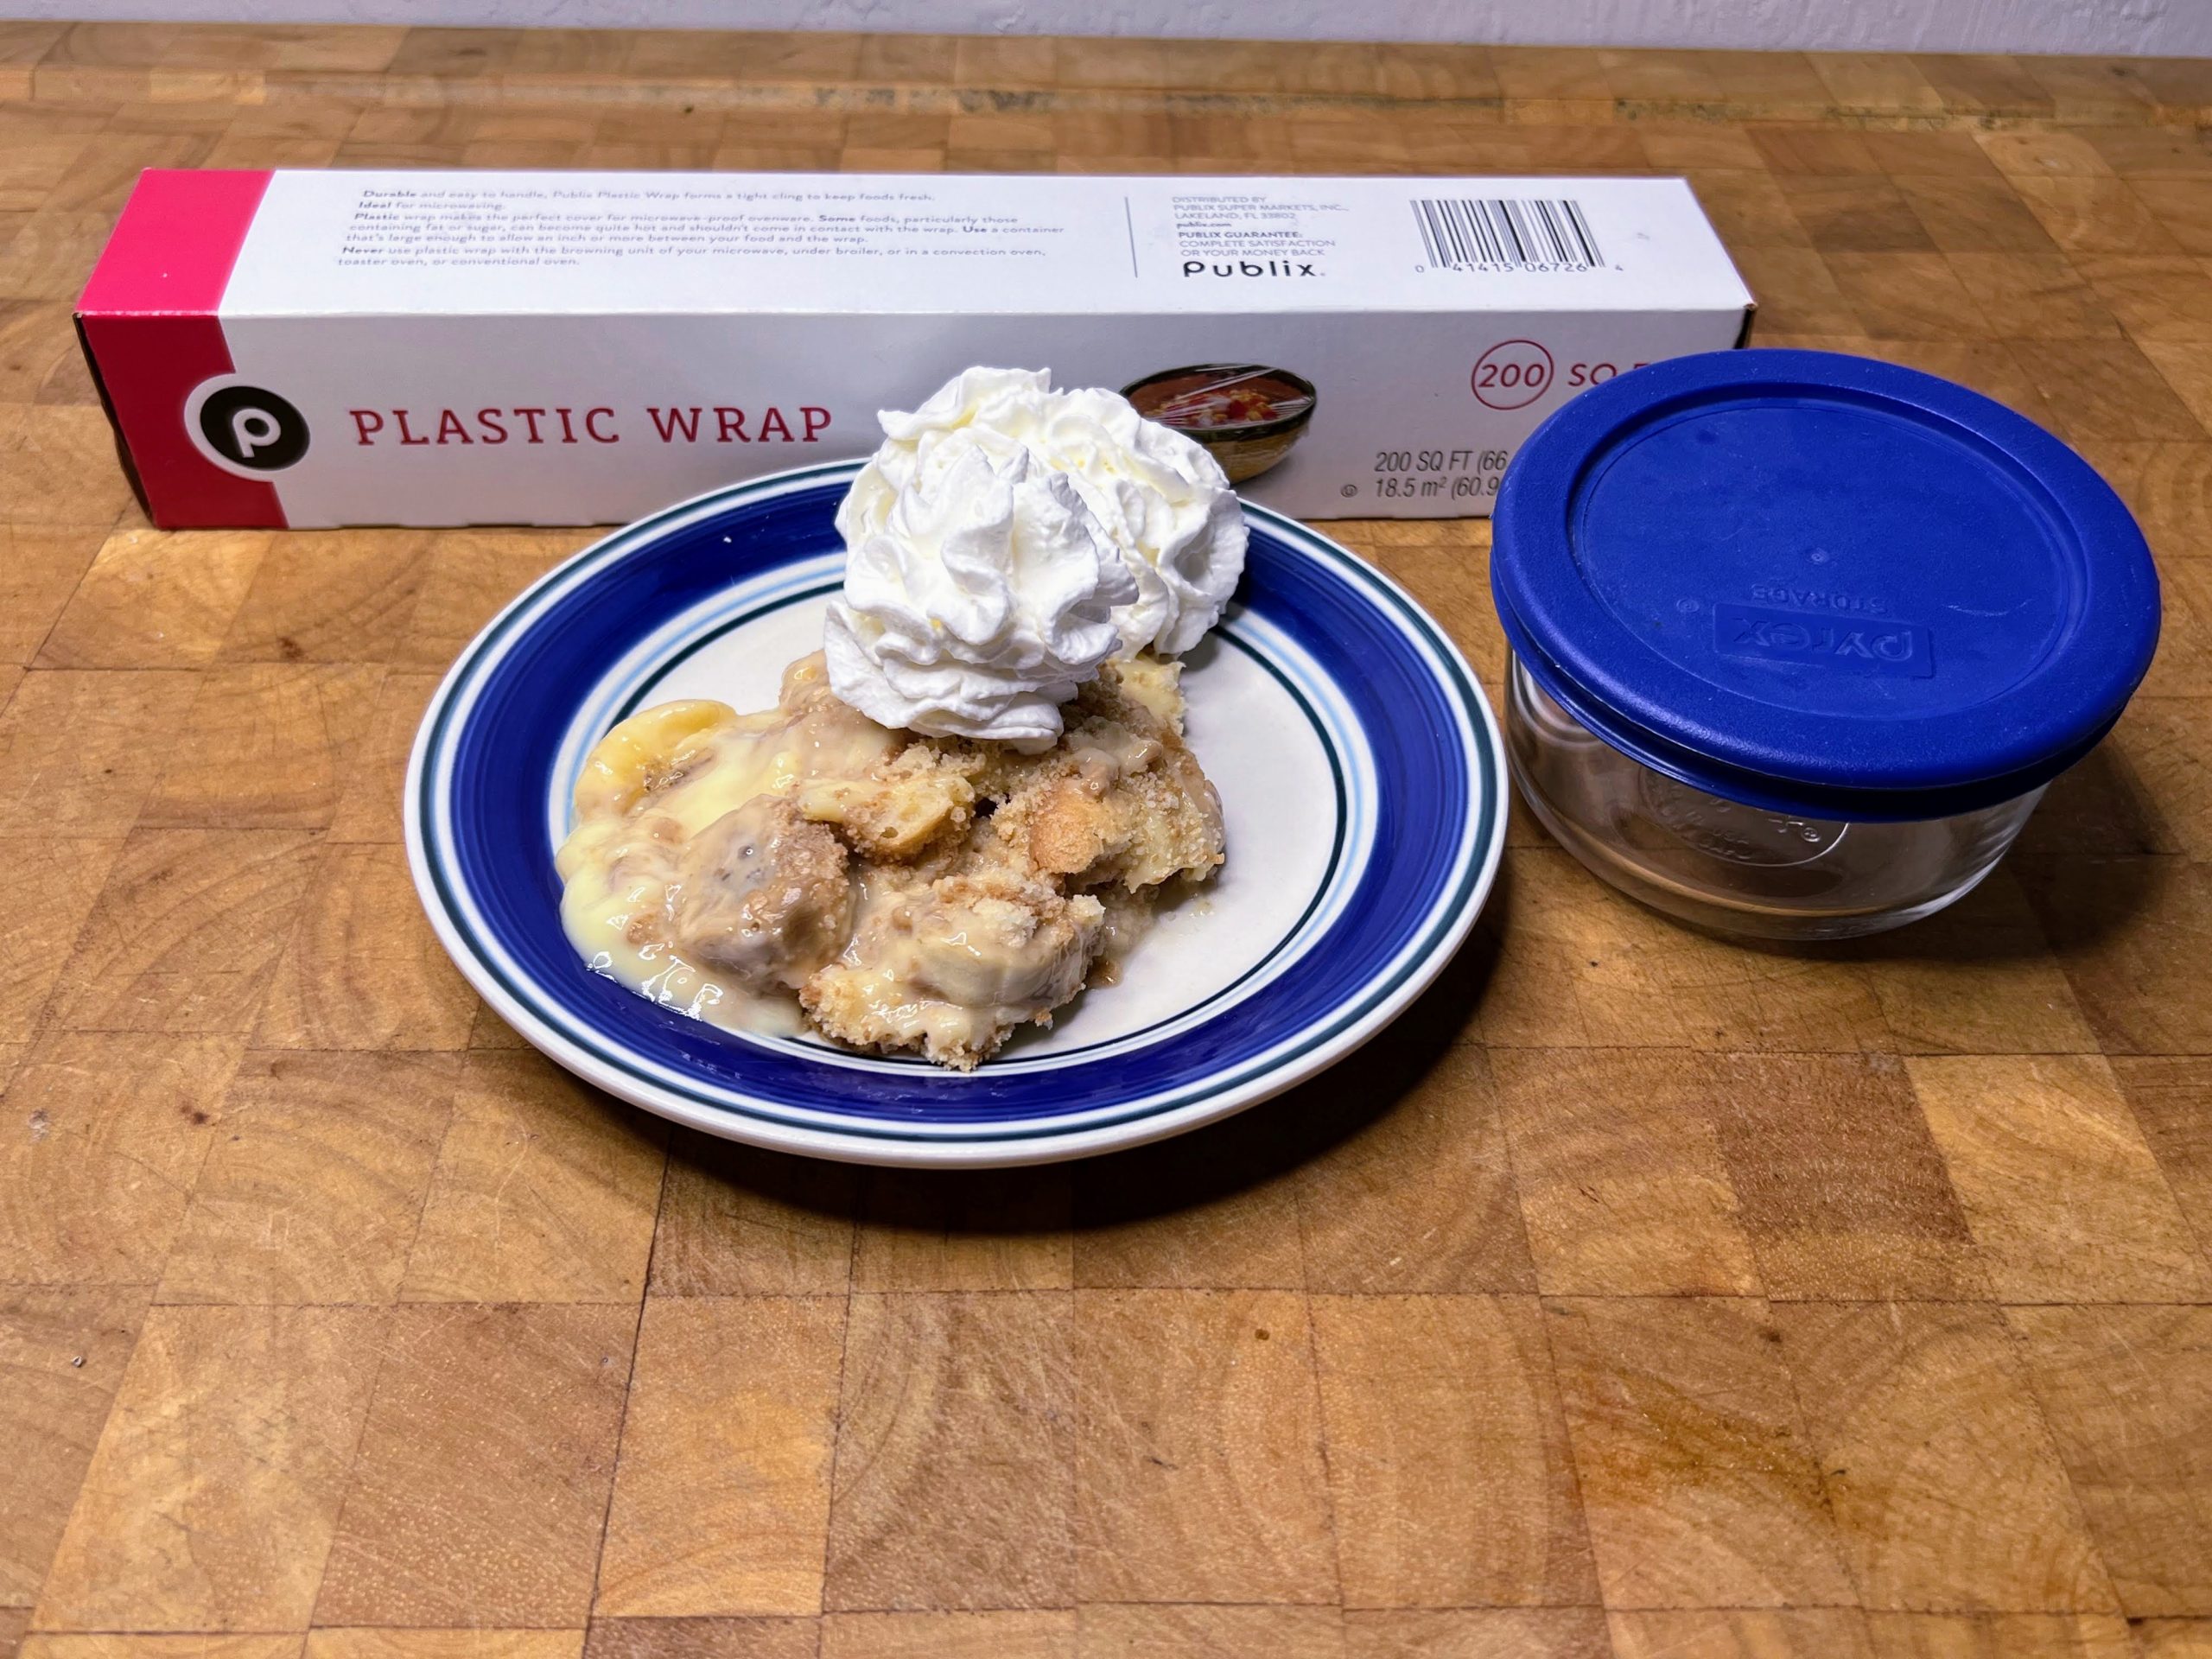 banana pudding on a plate, plastic wrap and an airtight freezer safe container